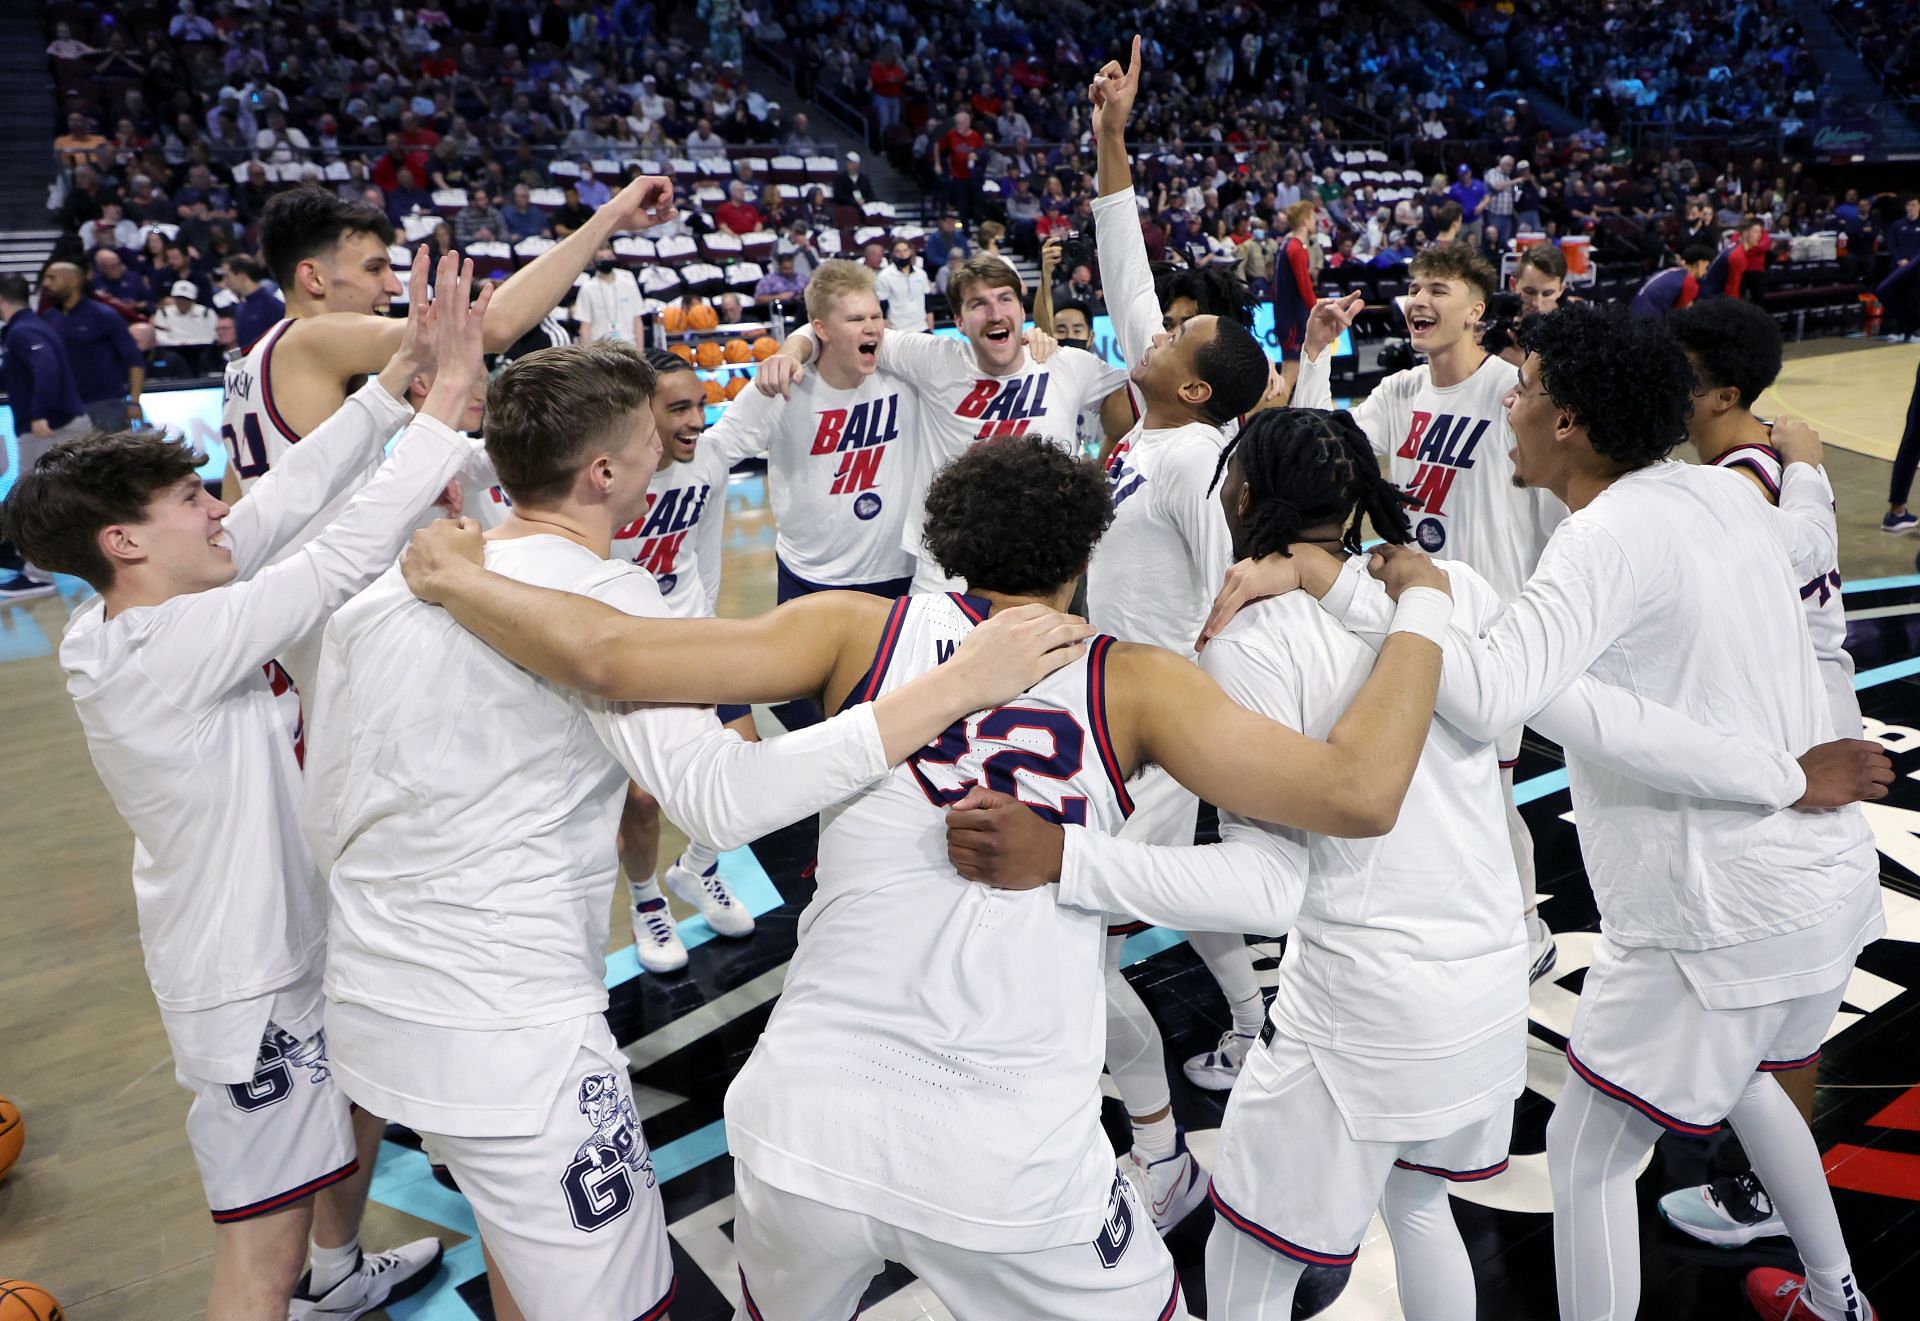 No. 1 Gonzaga is looking to ride their momentum to another national championship game.